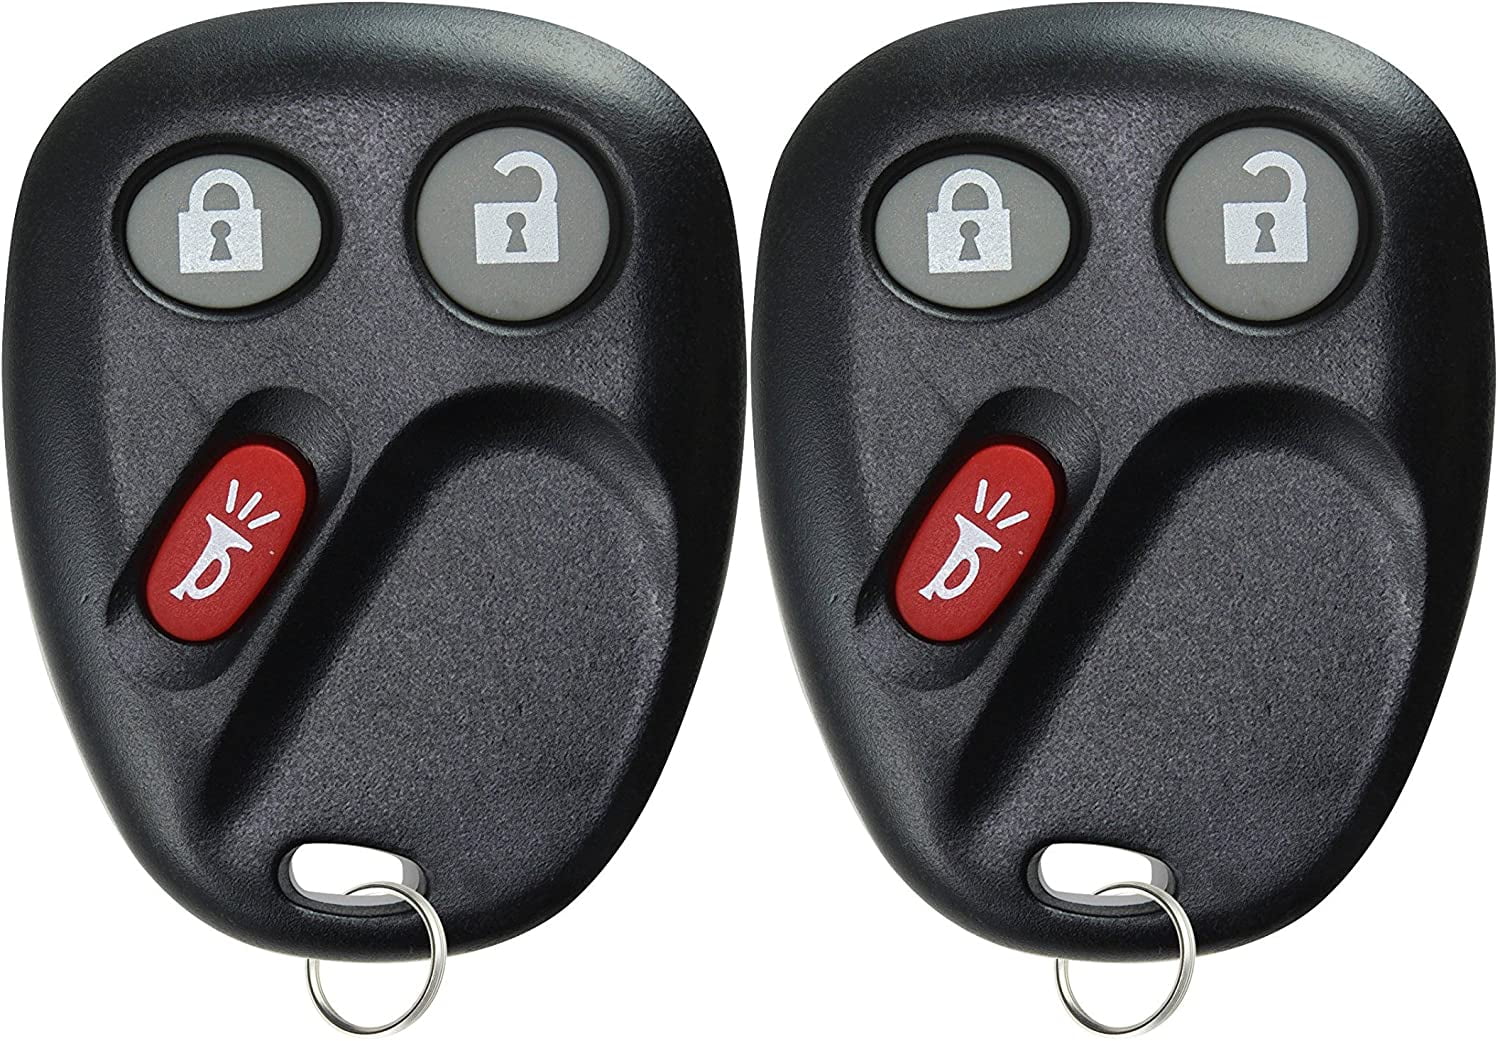 OEM MATCHED PAIR GM GMC CHEVY KEYLESS ENTRY REMOTE FOBS LHJ011 15186200 15186201